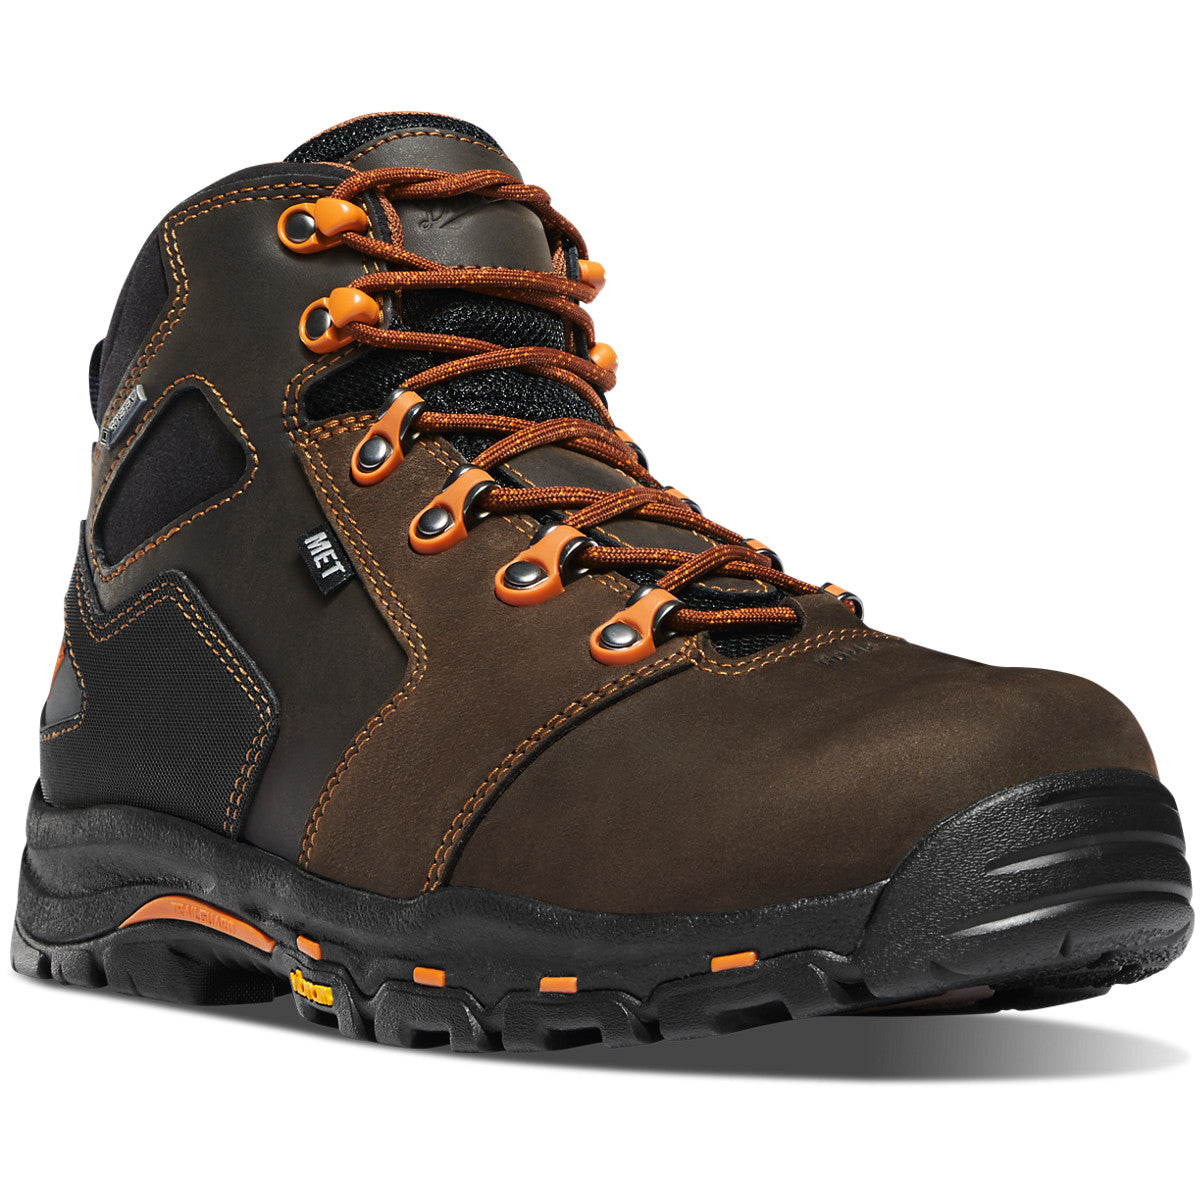 TUFF TOE BOOTS v2: Ultimate Work Boot Toe Guards & Superior Boot Saver  Protection